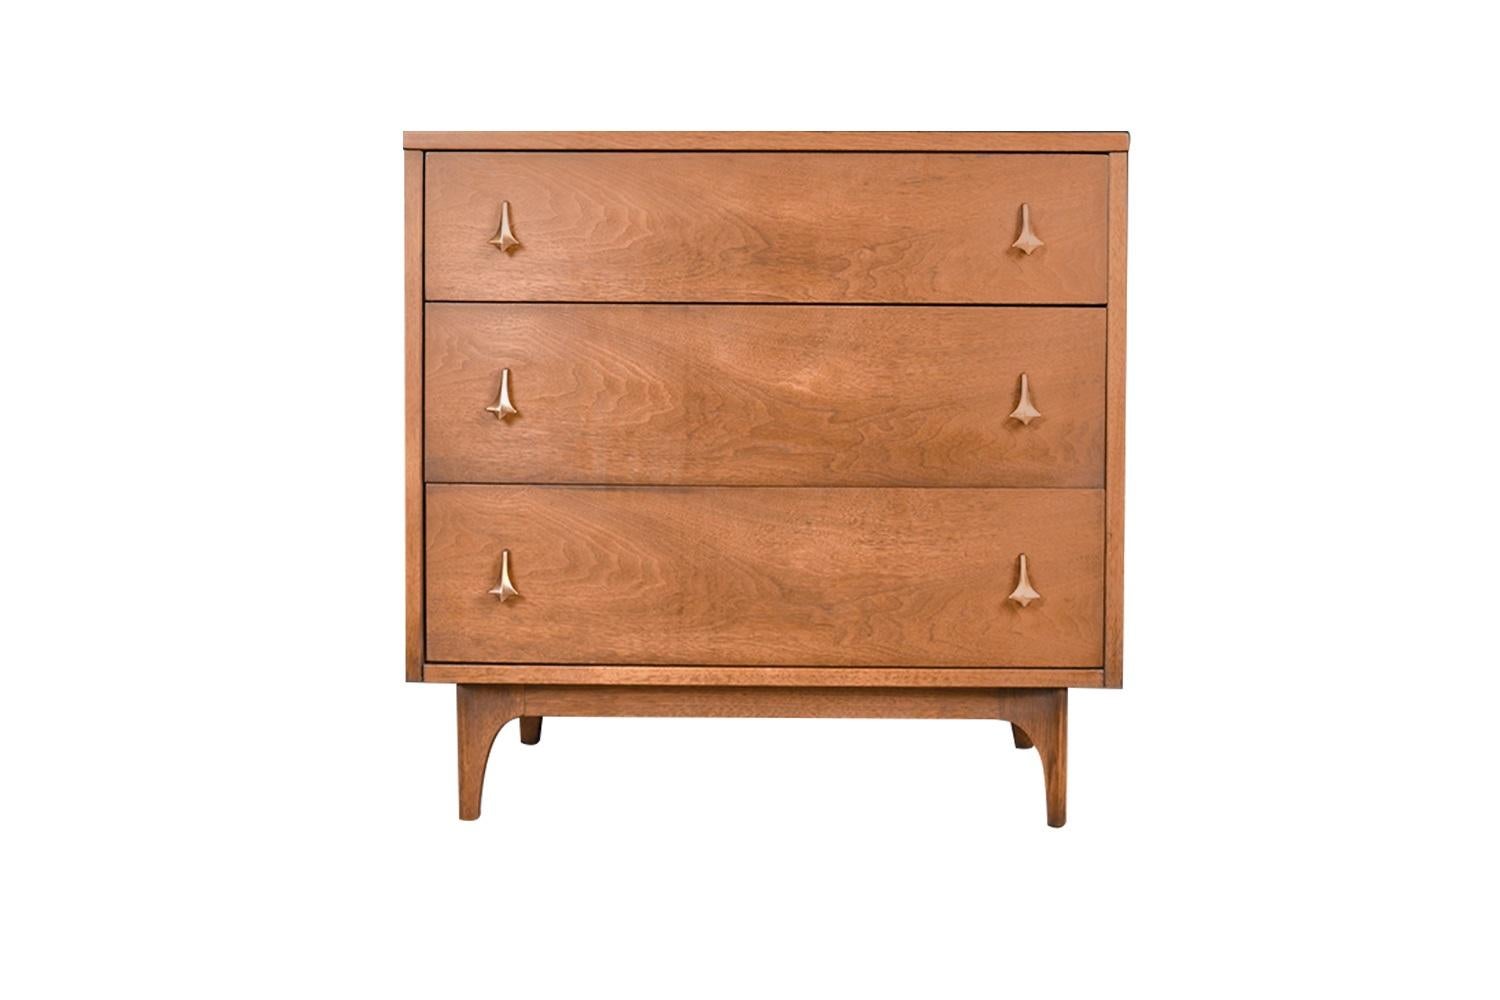 Fabulous Mid-Century Modern dresser three drawer bachelor chest circa 1960s by Broyhill Brasilia. Featuring a solid, beautifully grained walnut wood case and frame, housing three drawers each is adorned with original teardrop brass pulls, creating a